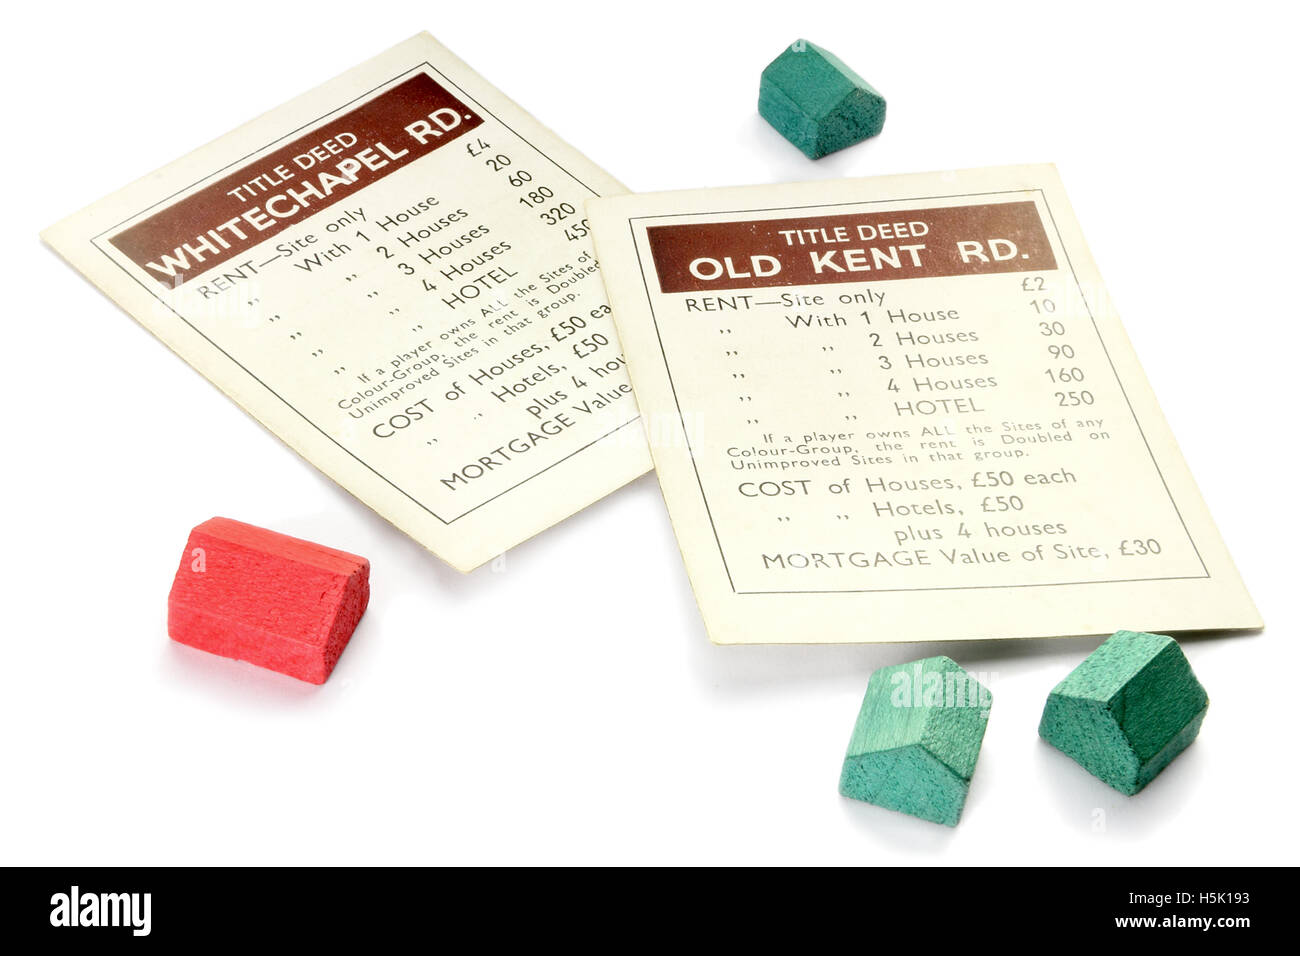 Vintage British Monopoly game (Whitechapel Road and Old Kent Road title deeds) circa 1940 Stock Photo